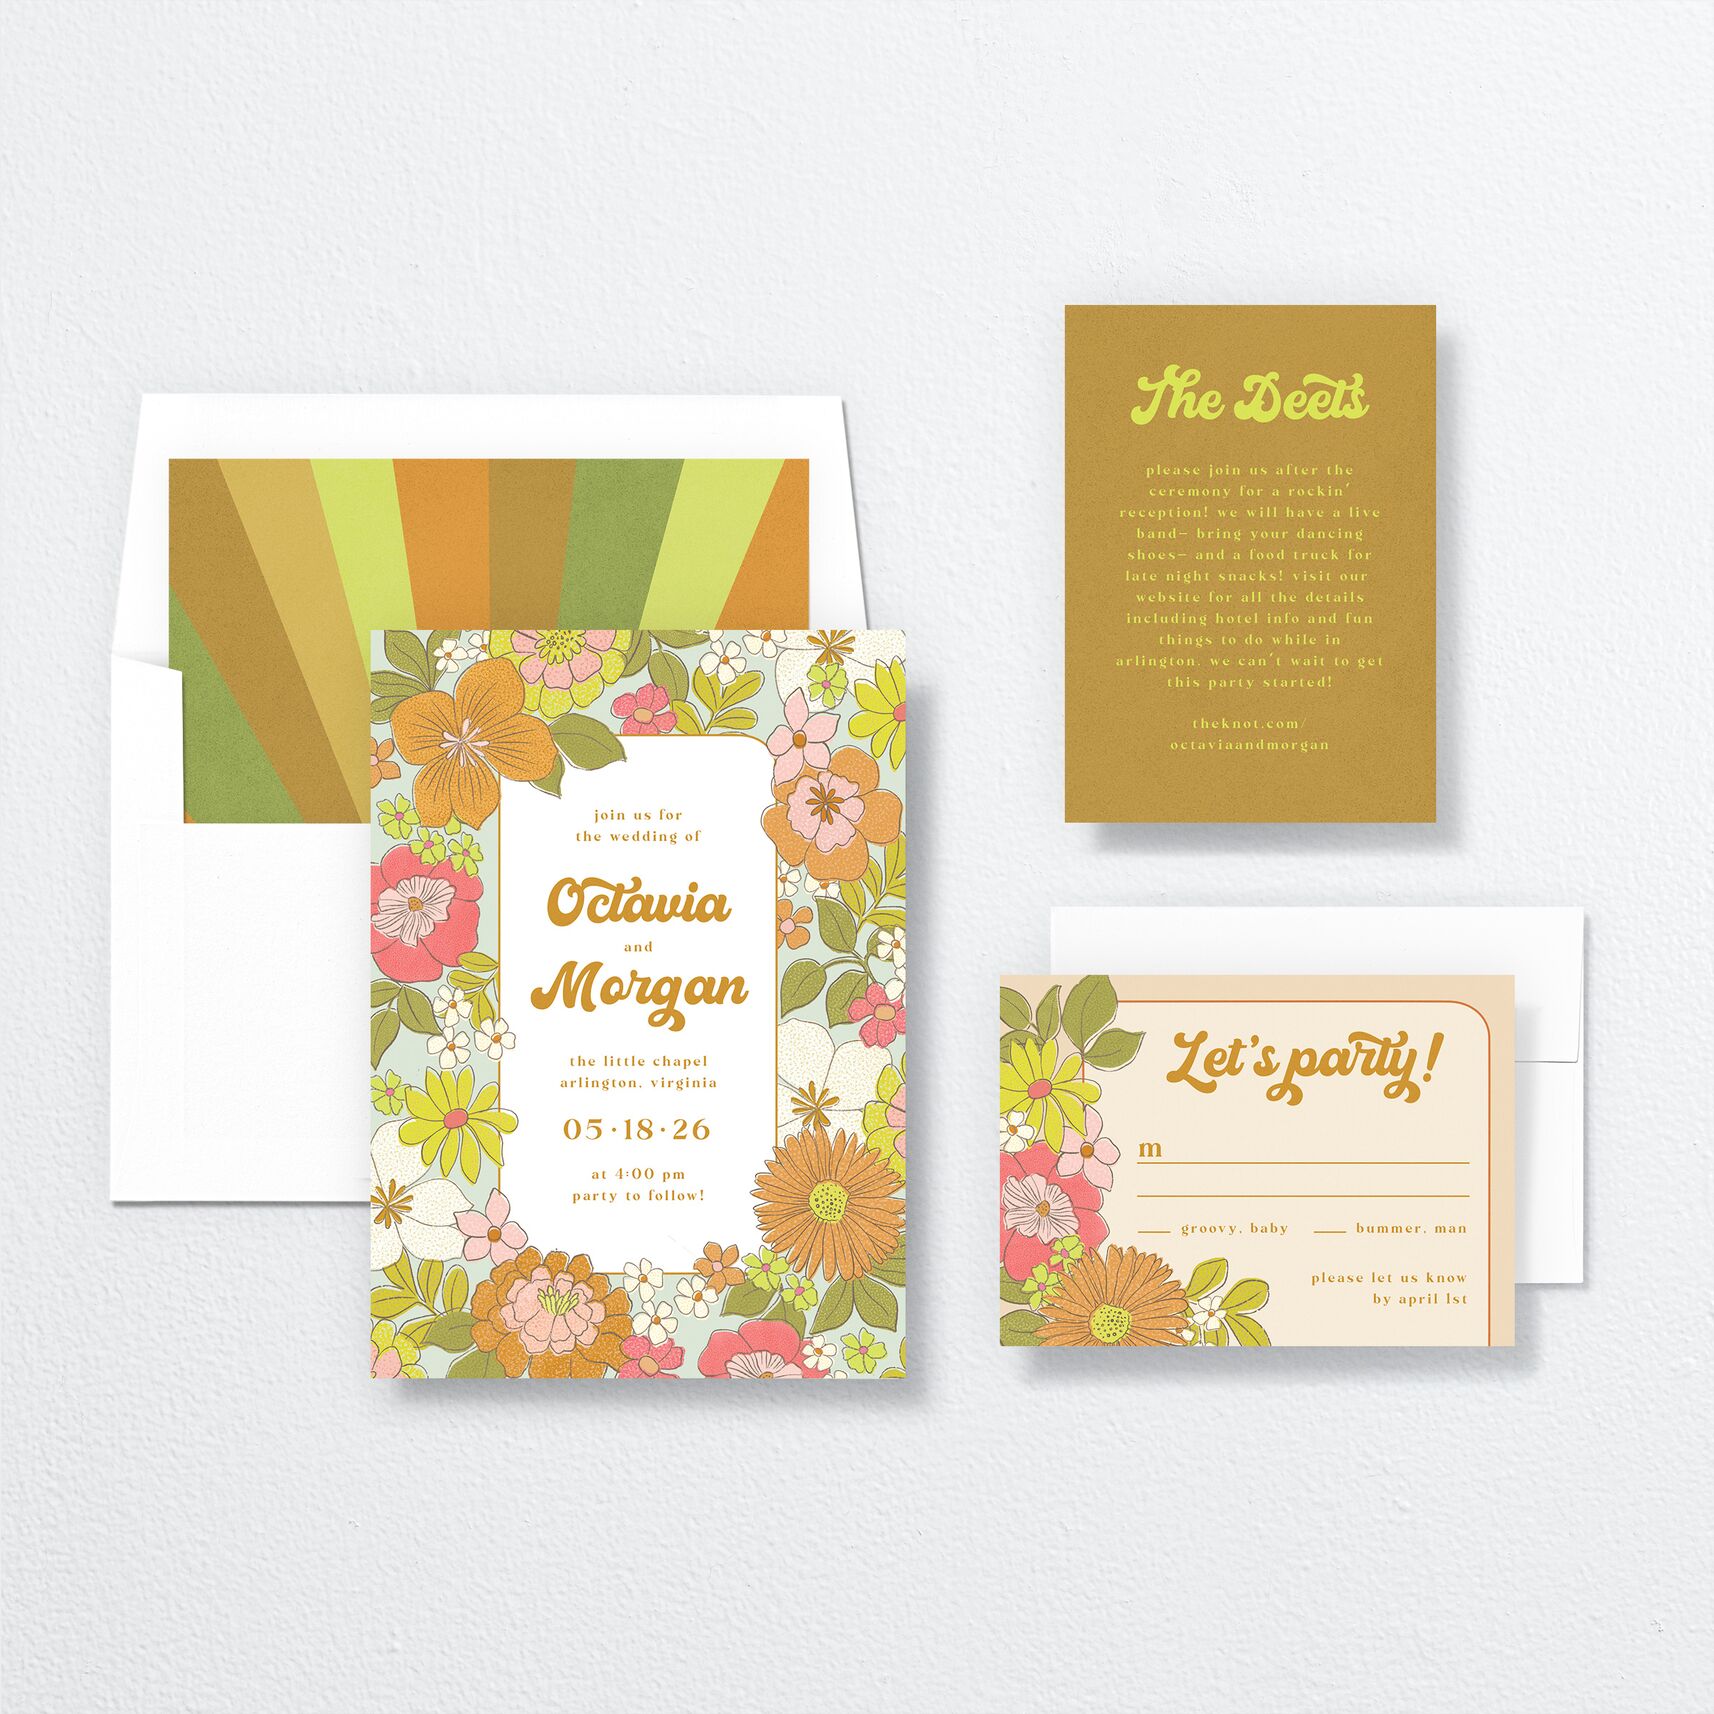 Groovy Blooms Wedding Invitations suite in yellow